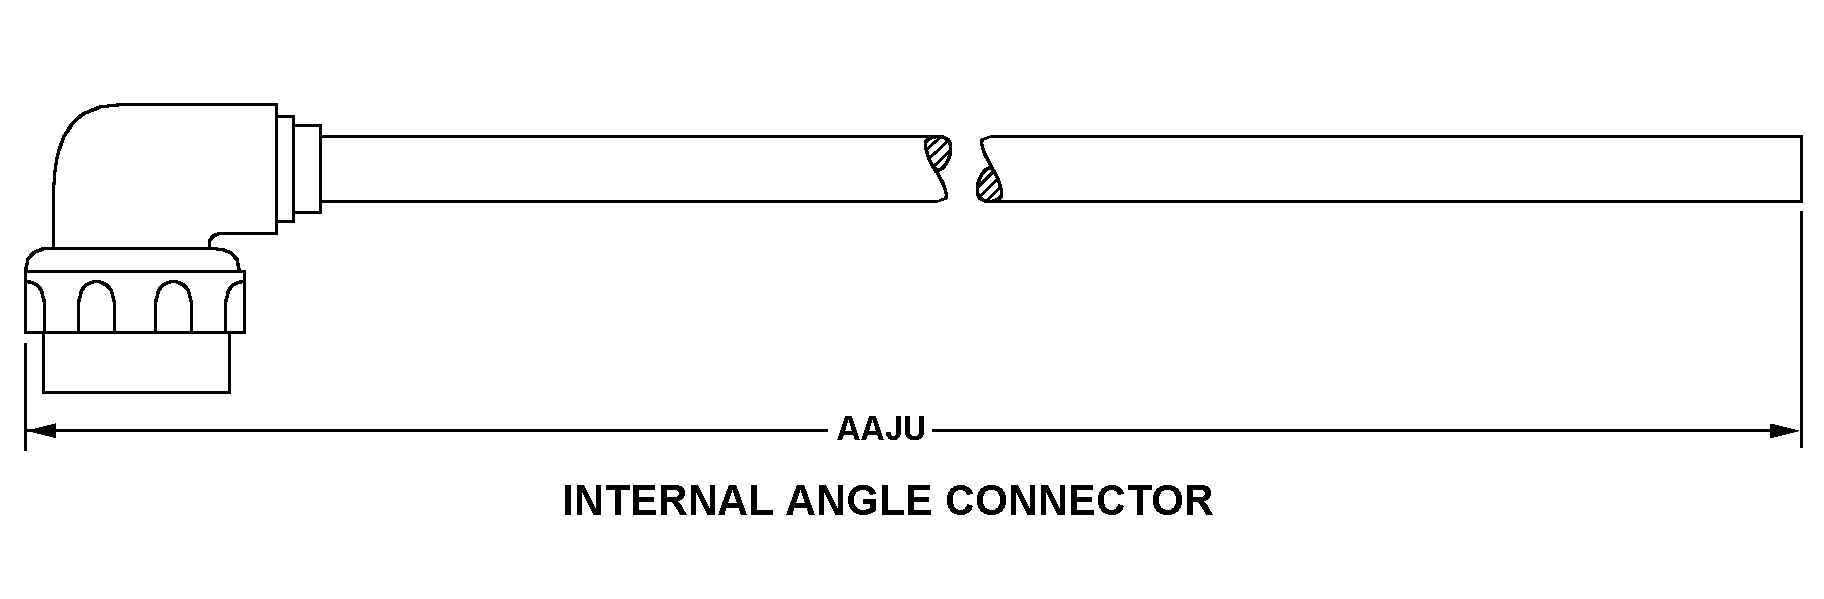 INTERNAL ANGLE CONNECTOR style nsn 5995-01-213-2904